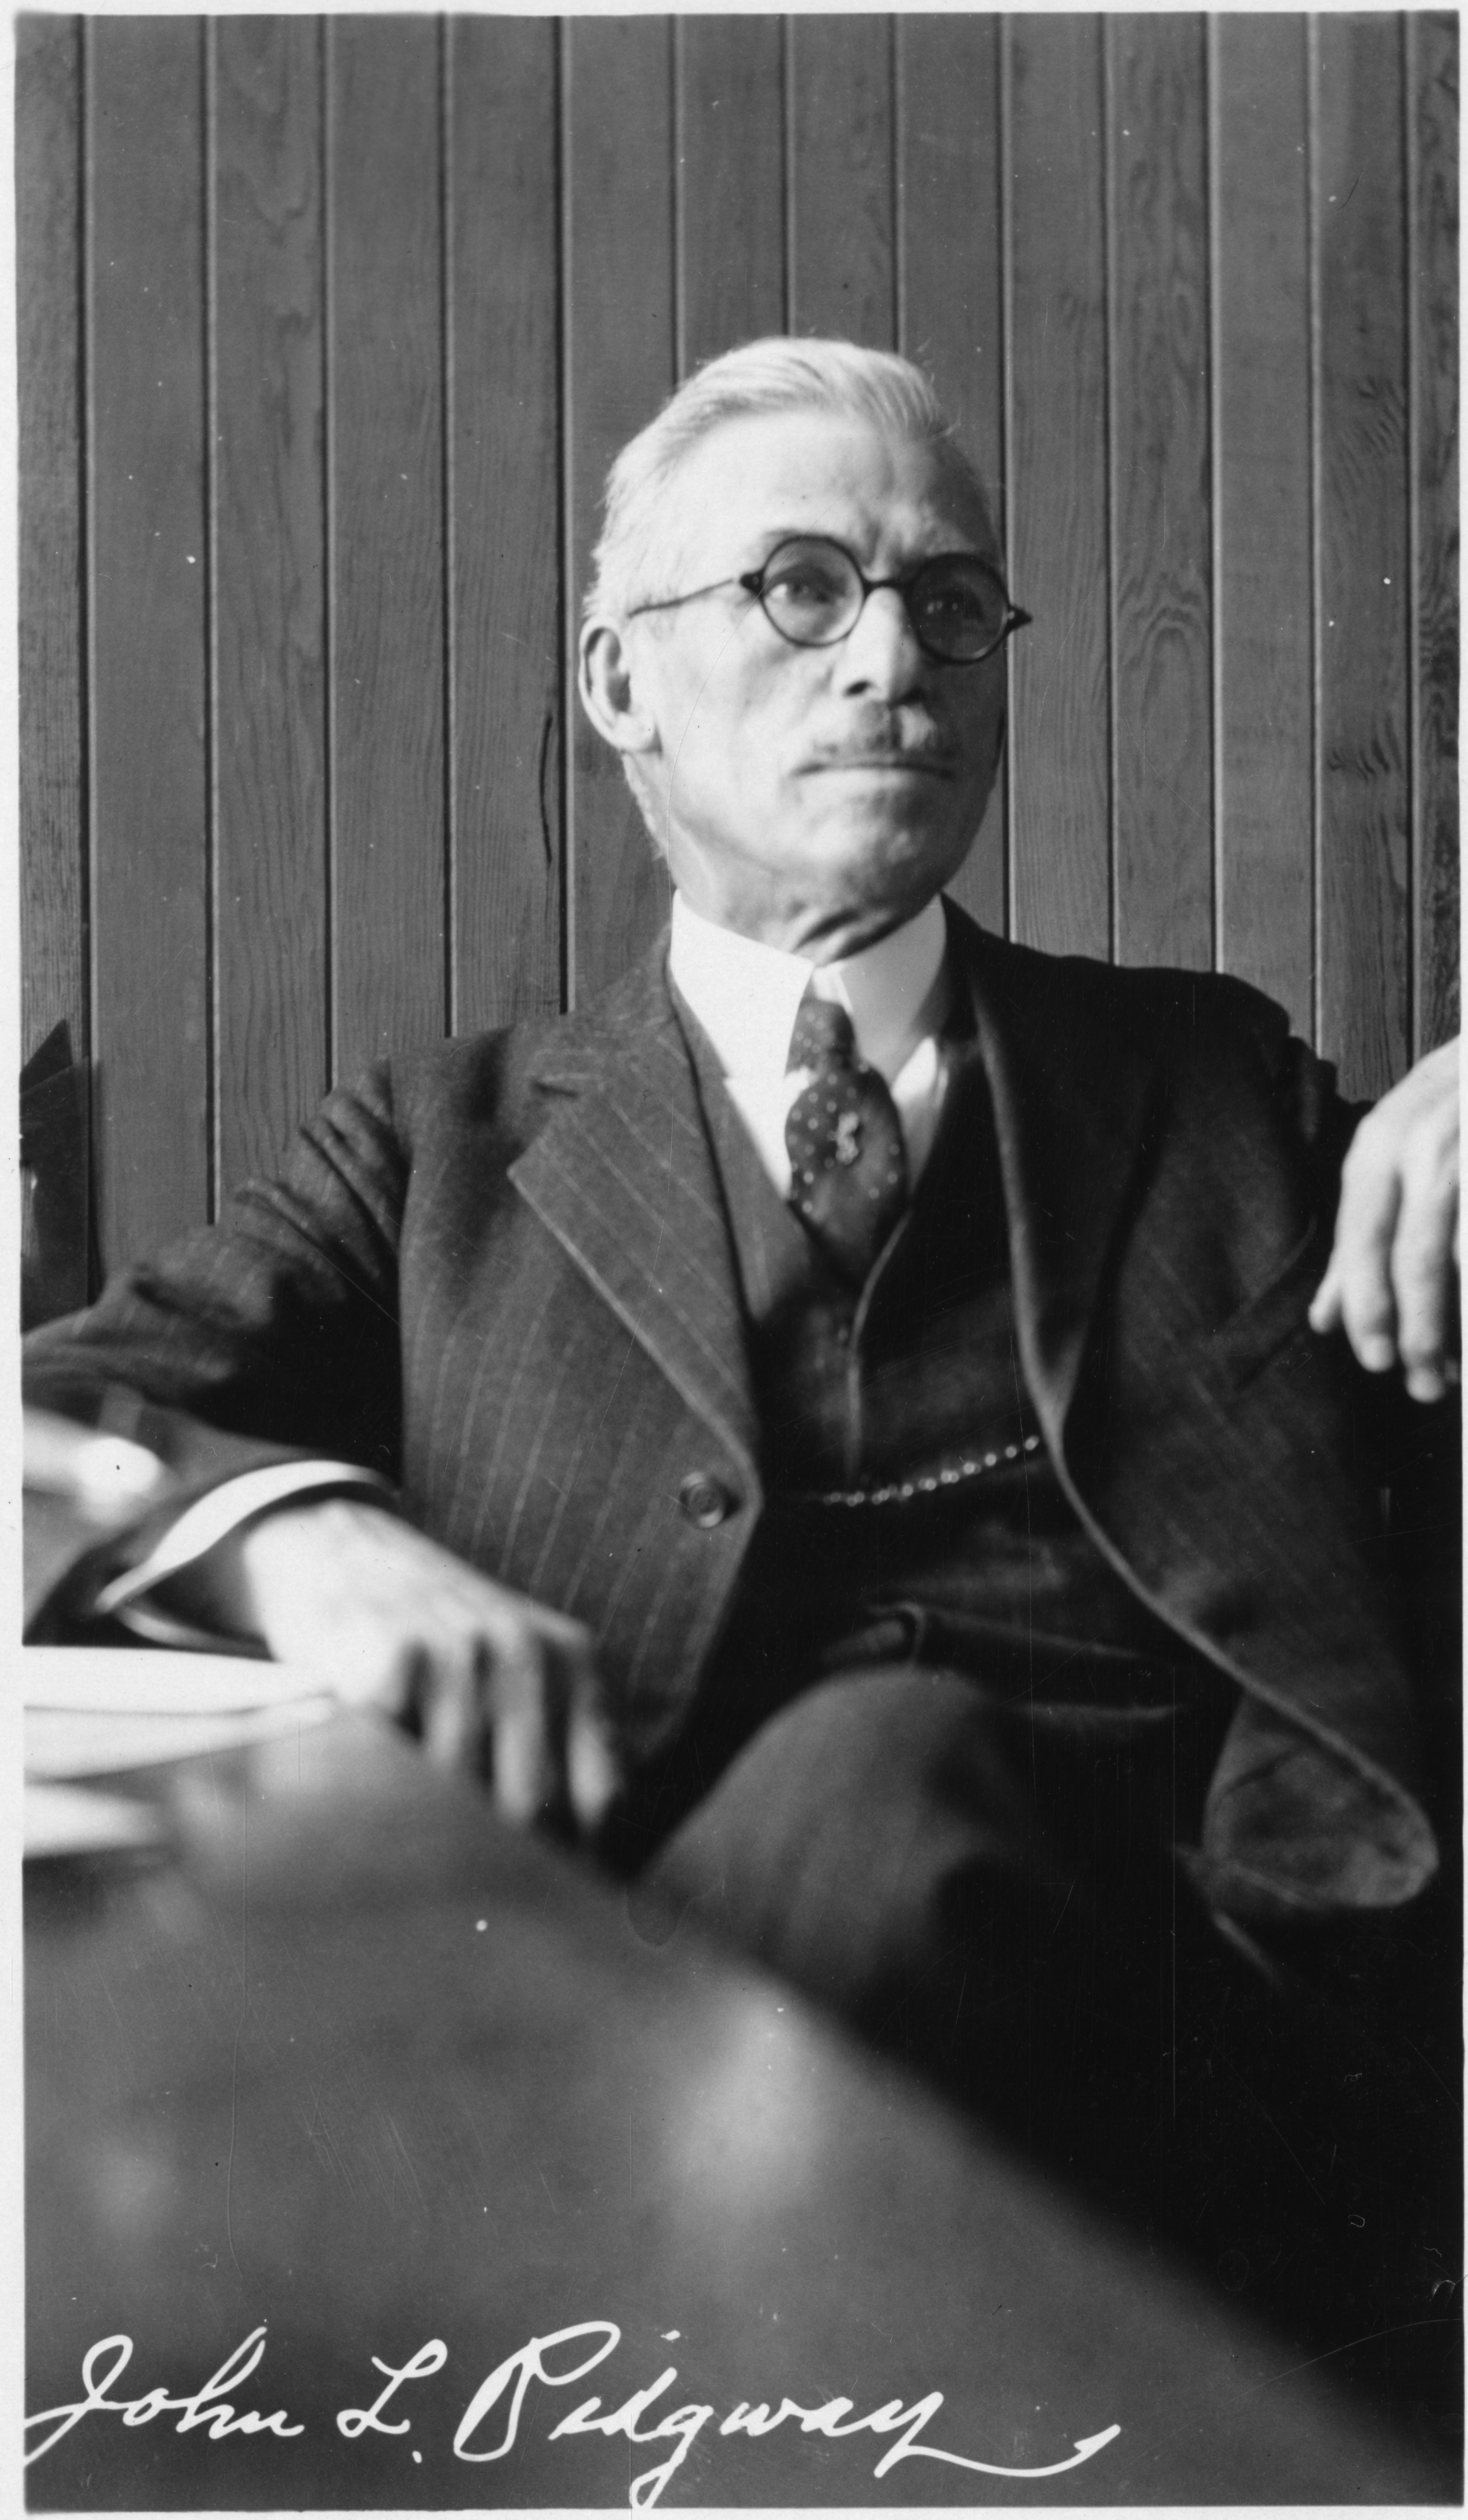 A man in a suit and wearing glasses sits at a desk. He leans back. At the bottom of the photograph "